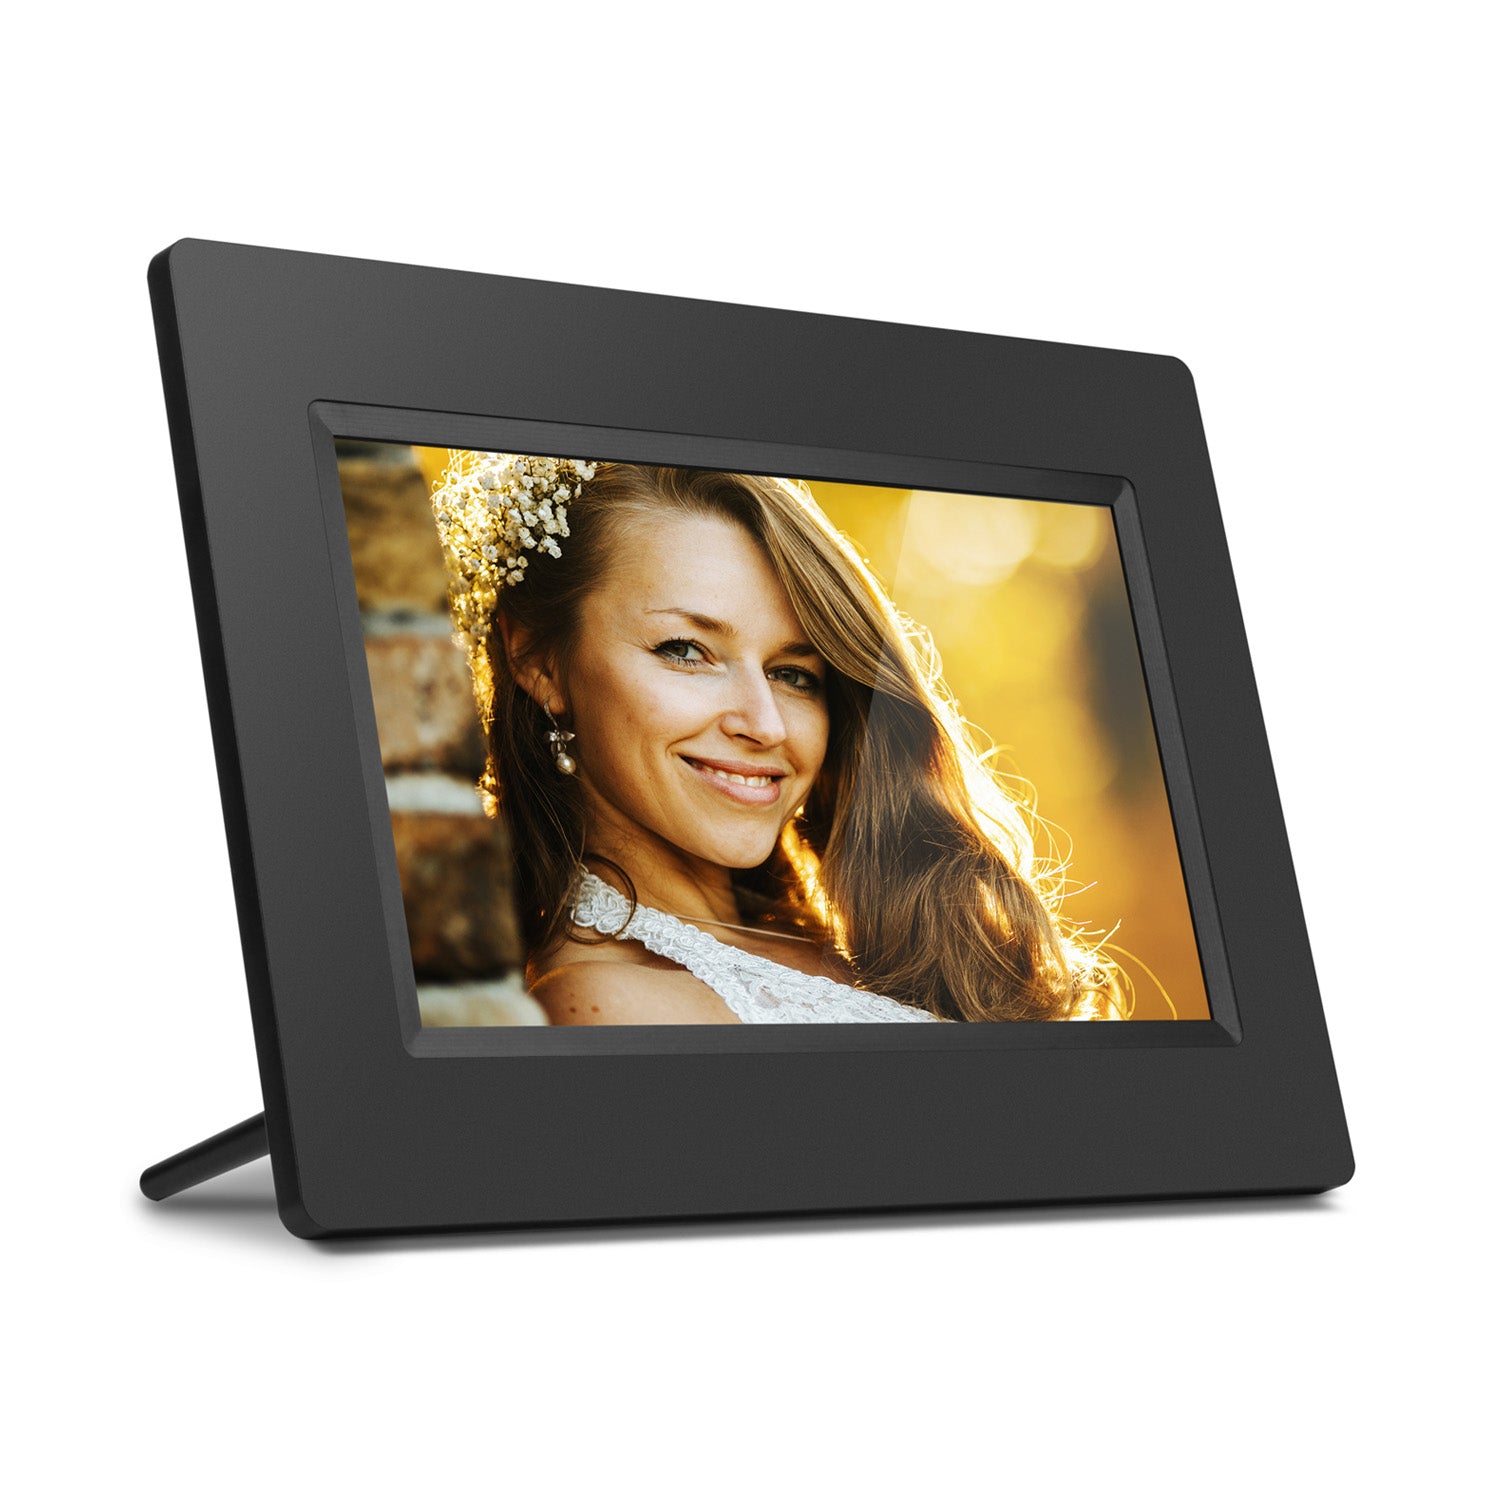 Buil Touchscreen Photo Frame with LCD Digital IPS WiFi Display 8GB and